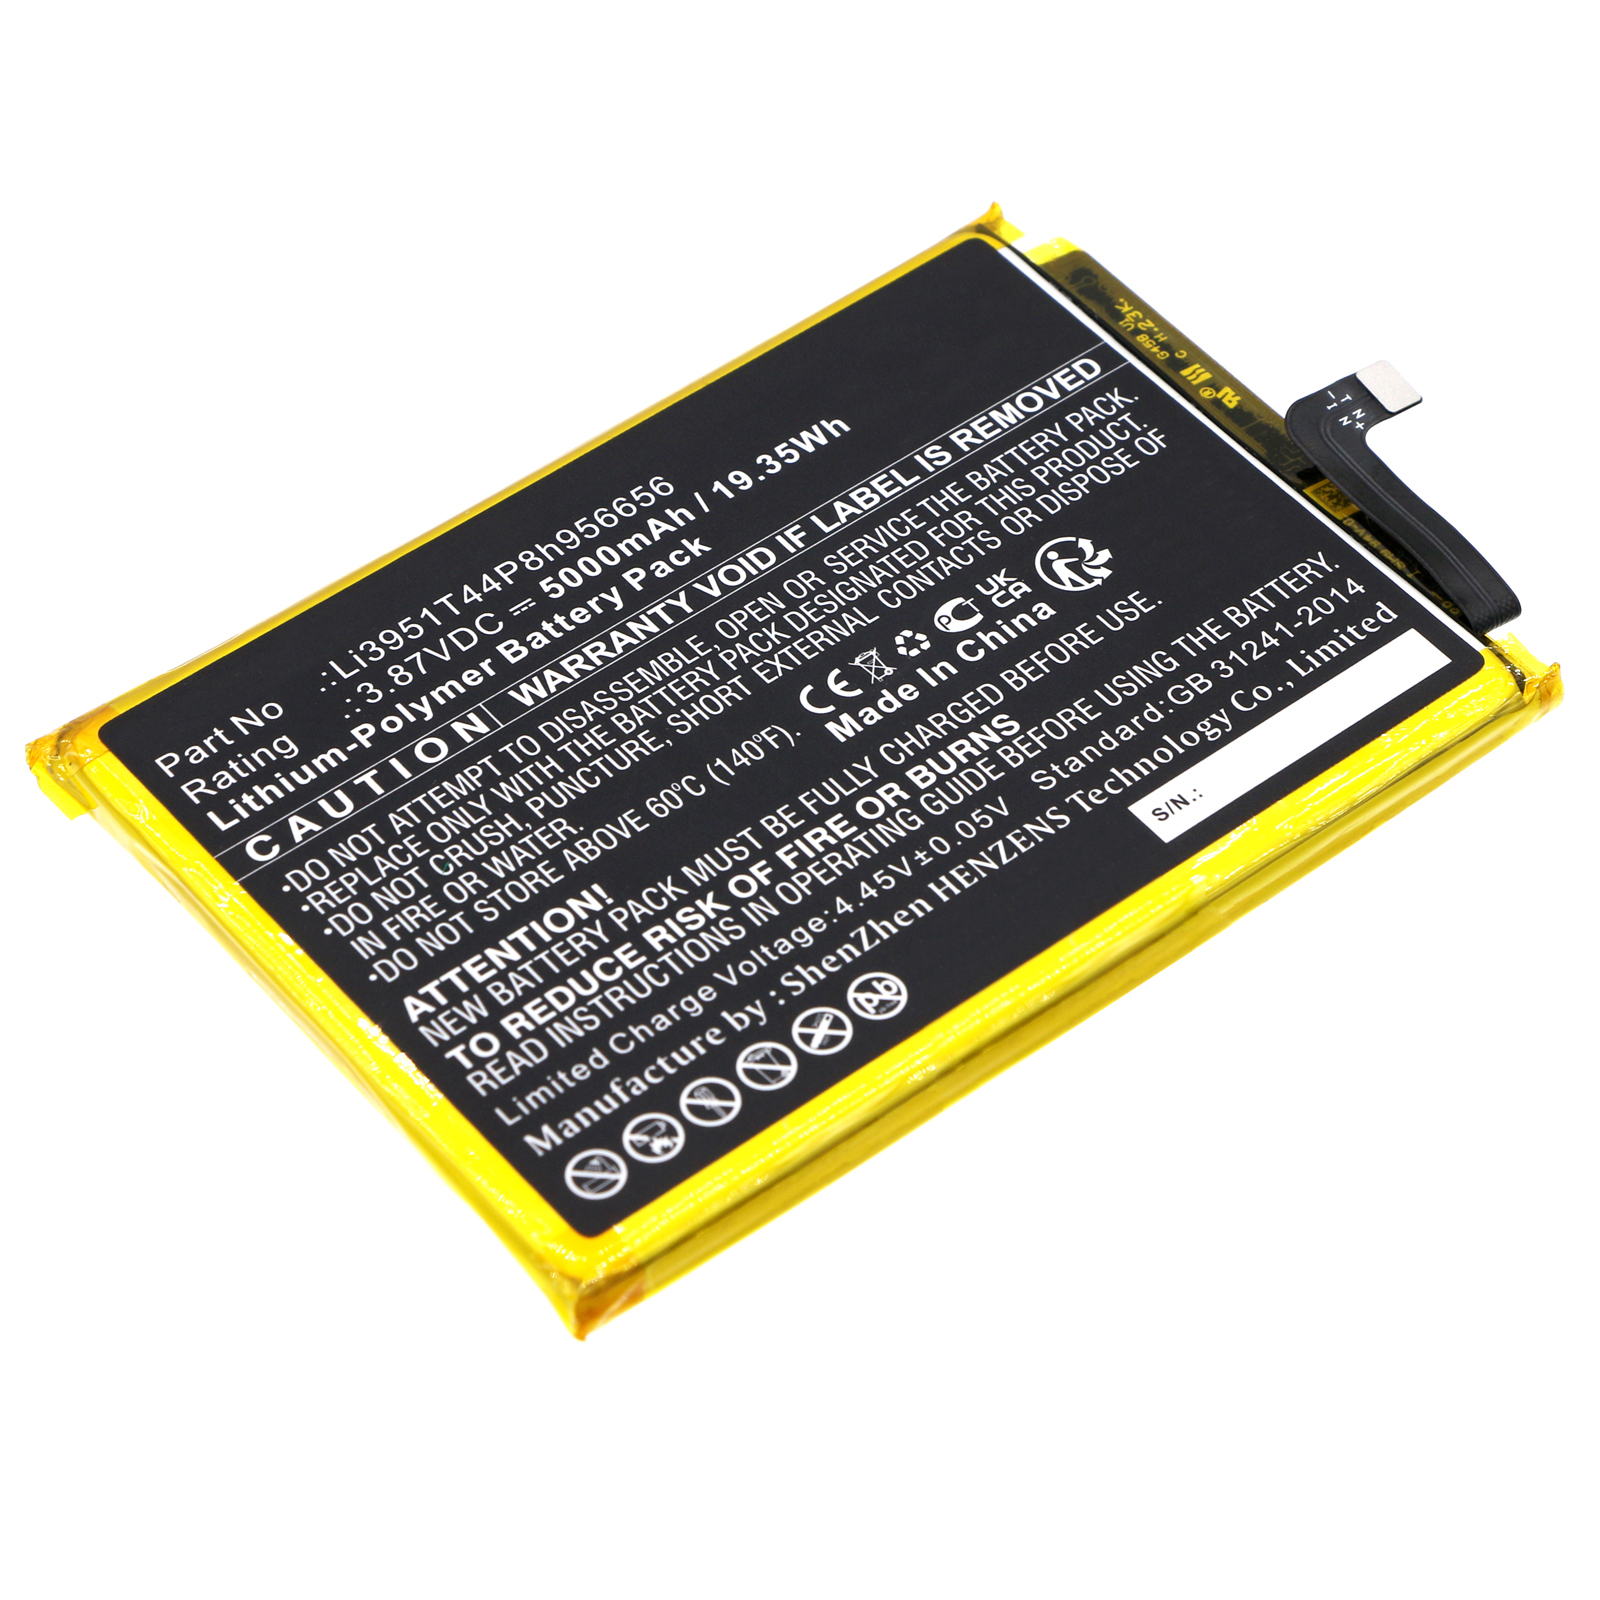 Synergy Digital Cell Phone Battery, Compatible with ZTE Li3951T44P8h956656 Cell Phone Battery (Li-Pol, 3.87V, 5000mAh)